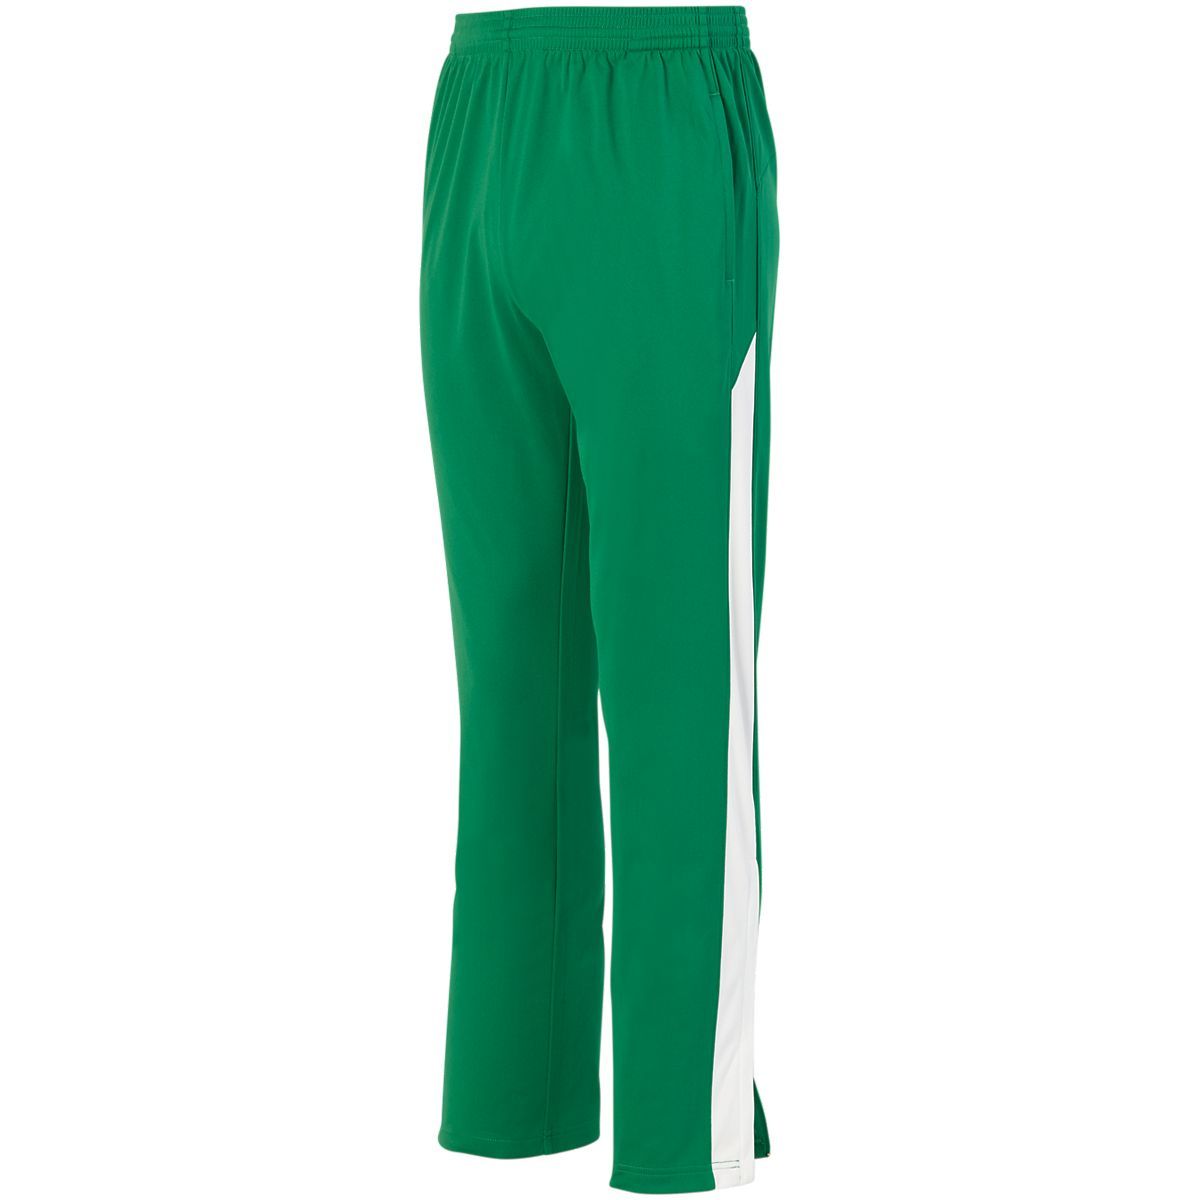 Augusta Sportswear Youth Medalist Pant 2.0 in Kelly/White  -Part of the Youth, Youth-Pants, Pants, Augusta-Products product lines at KanaleyCreations.com